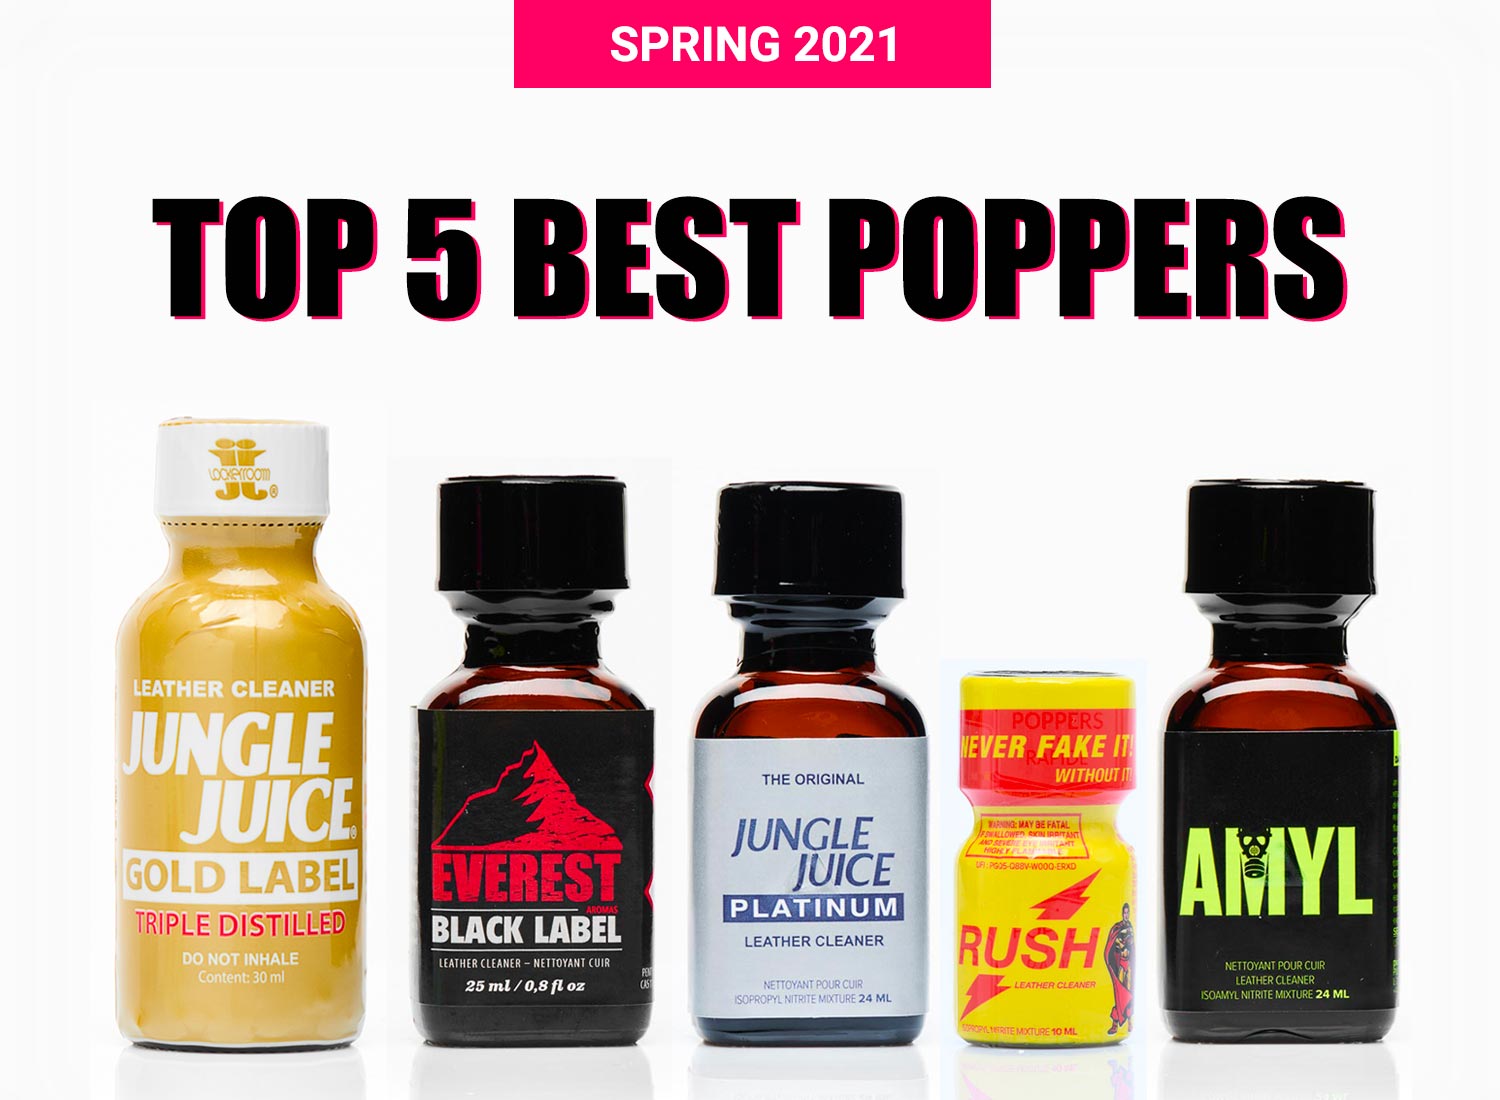 Which are the best poppers